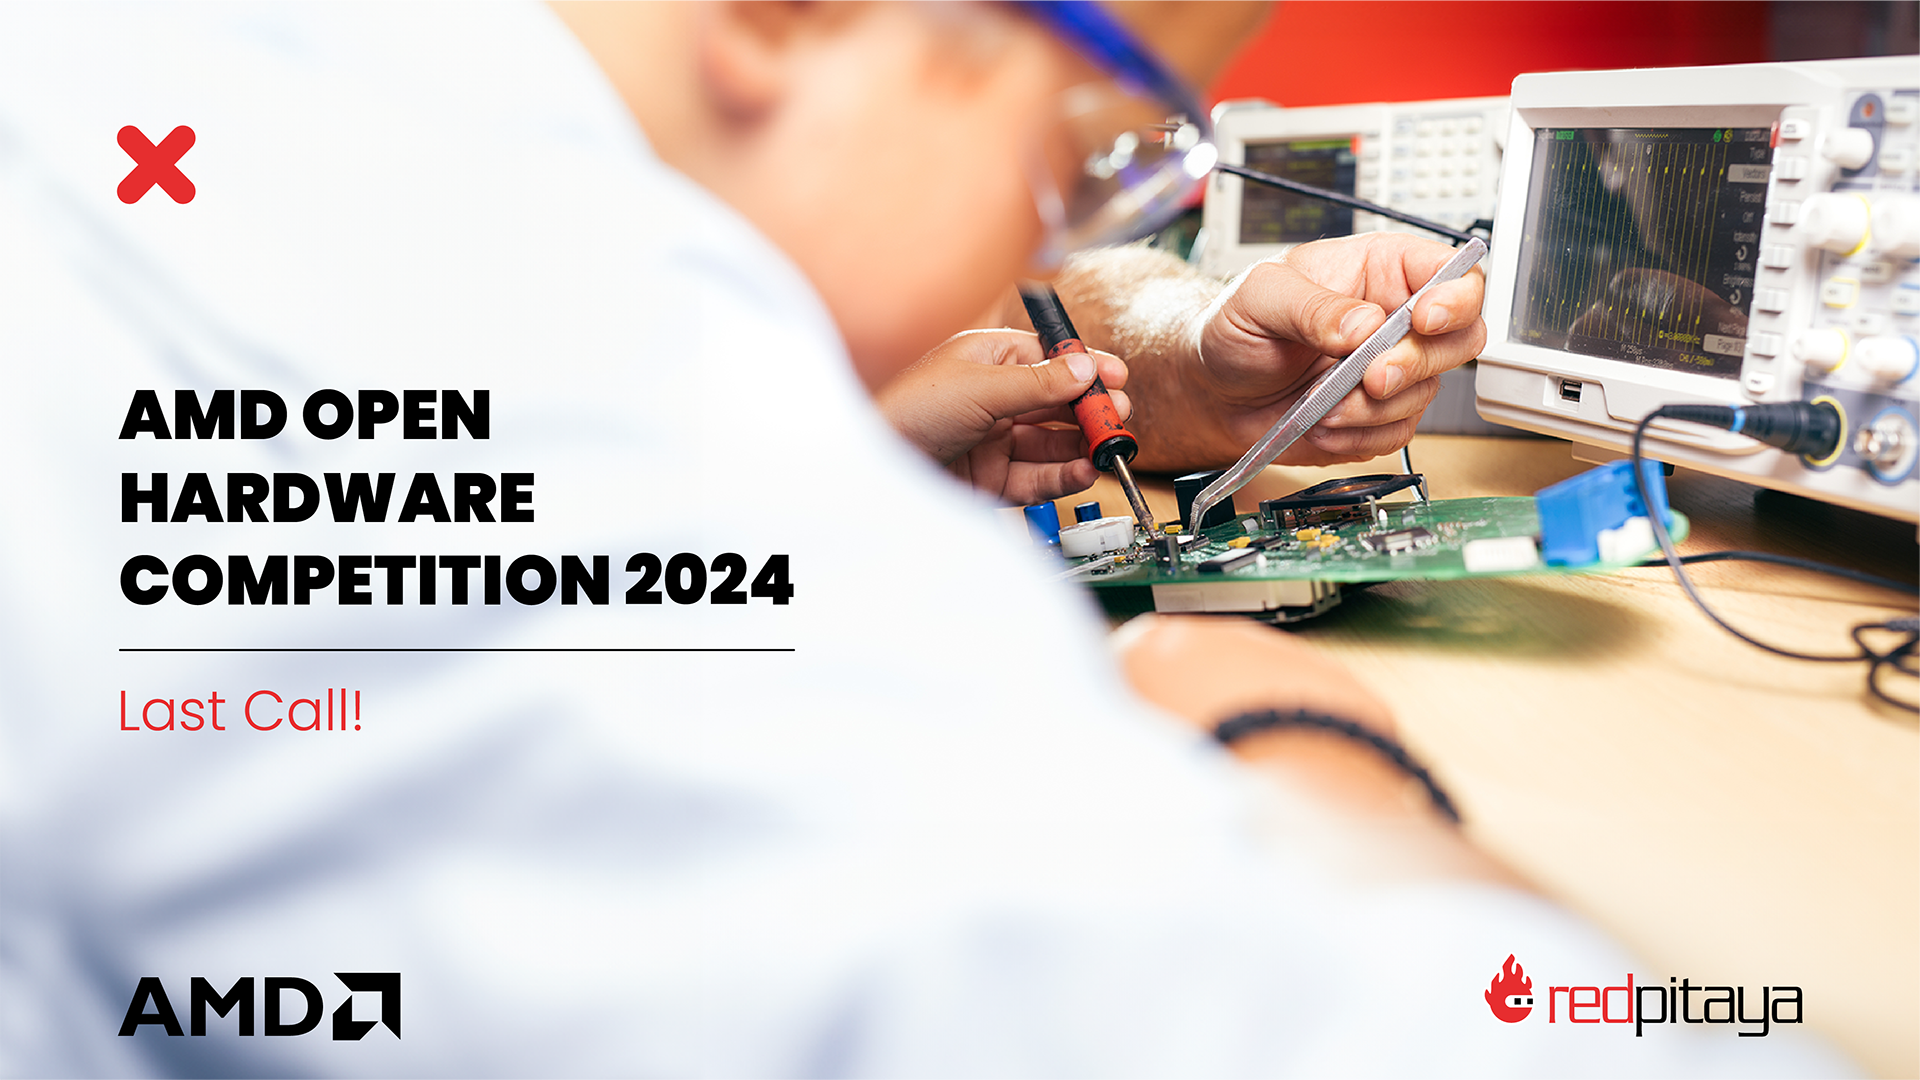 Unleash your creativity in the AMD Open Hardware Competition 2024 with Red Pitaya